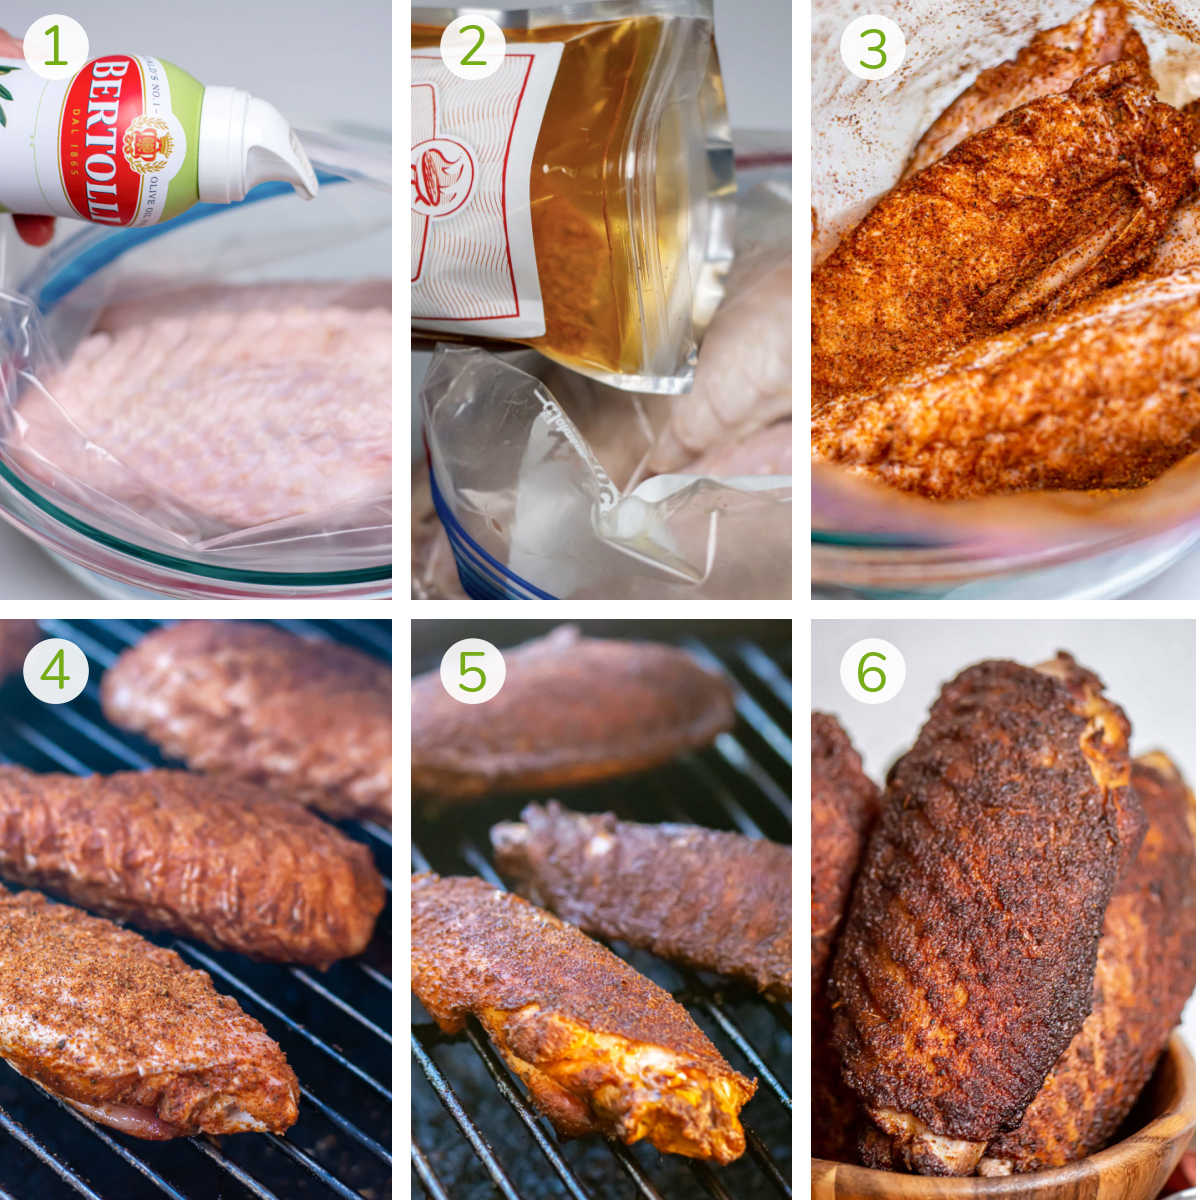 instruction photo showing adding oil and dry rub, smoking the turkey wings and then serving.